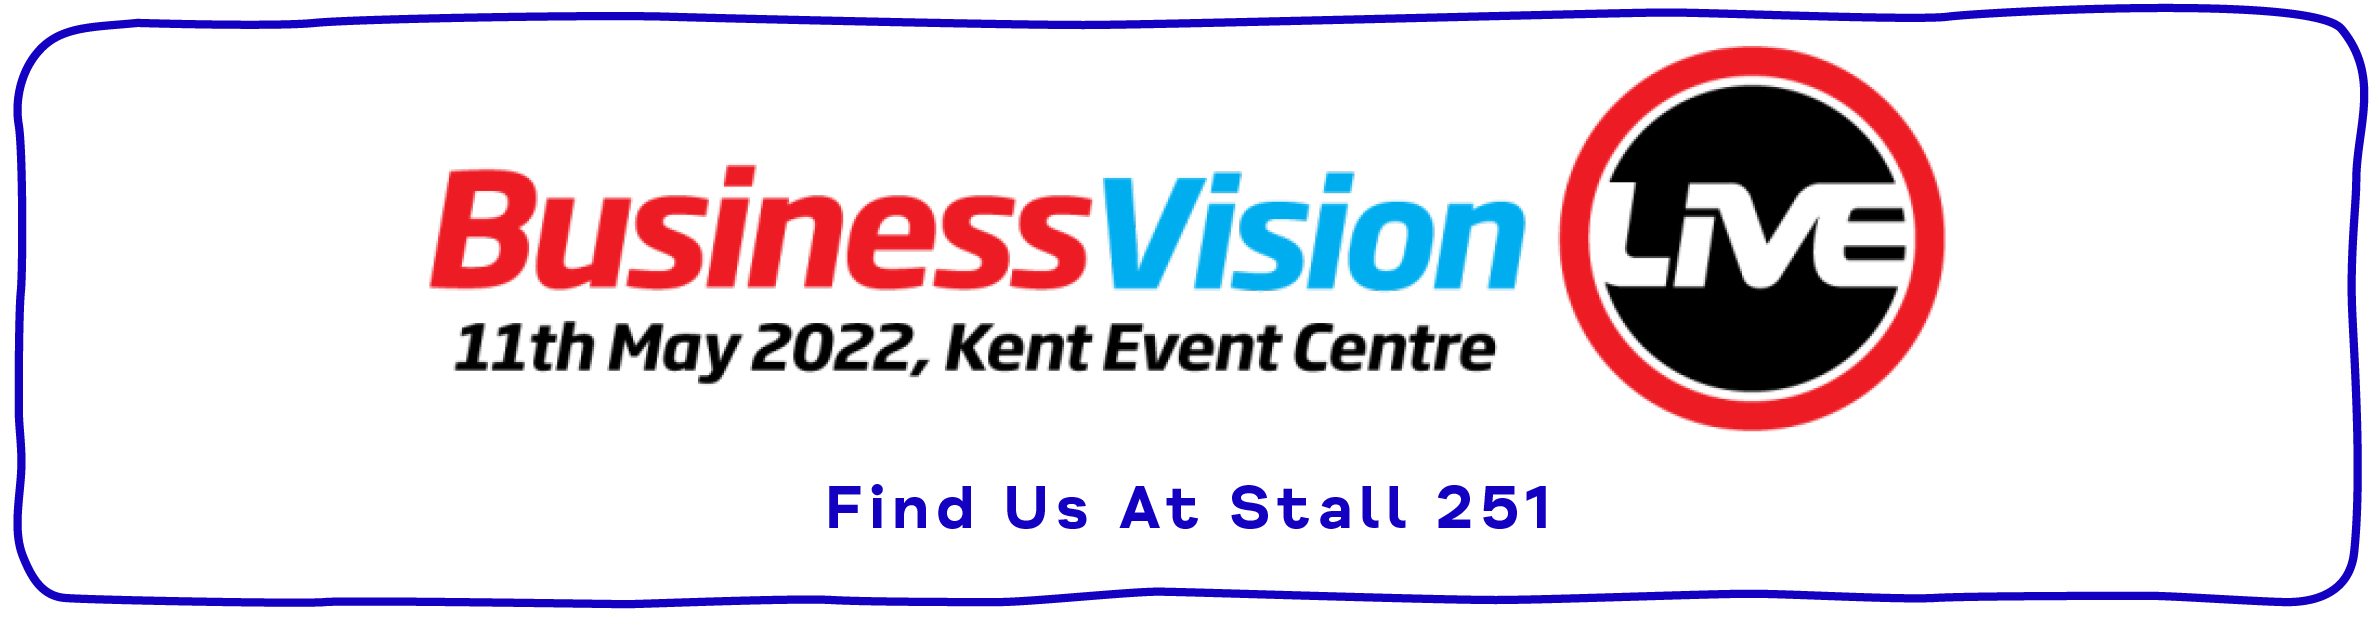 Kent Business Vision Live - Find Us At Stall 251 